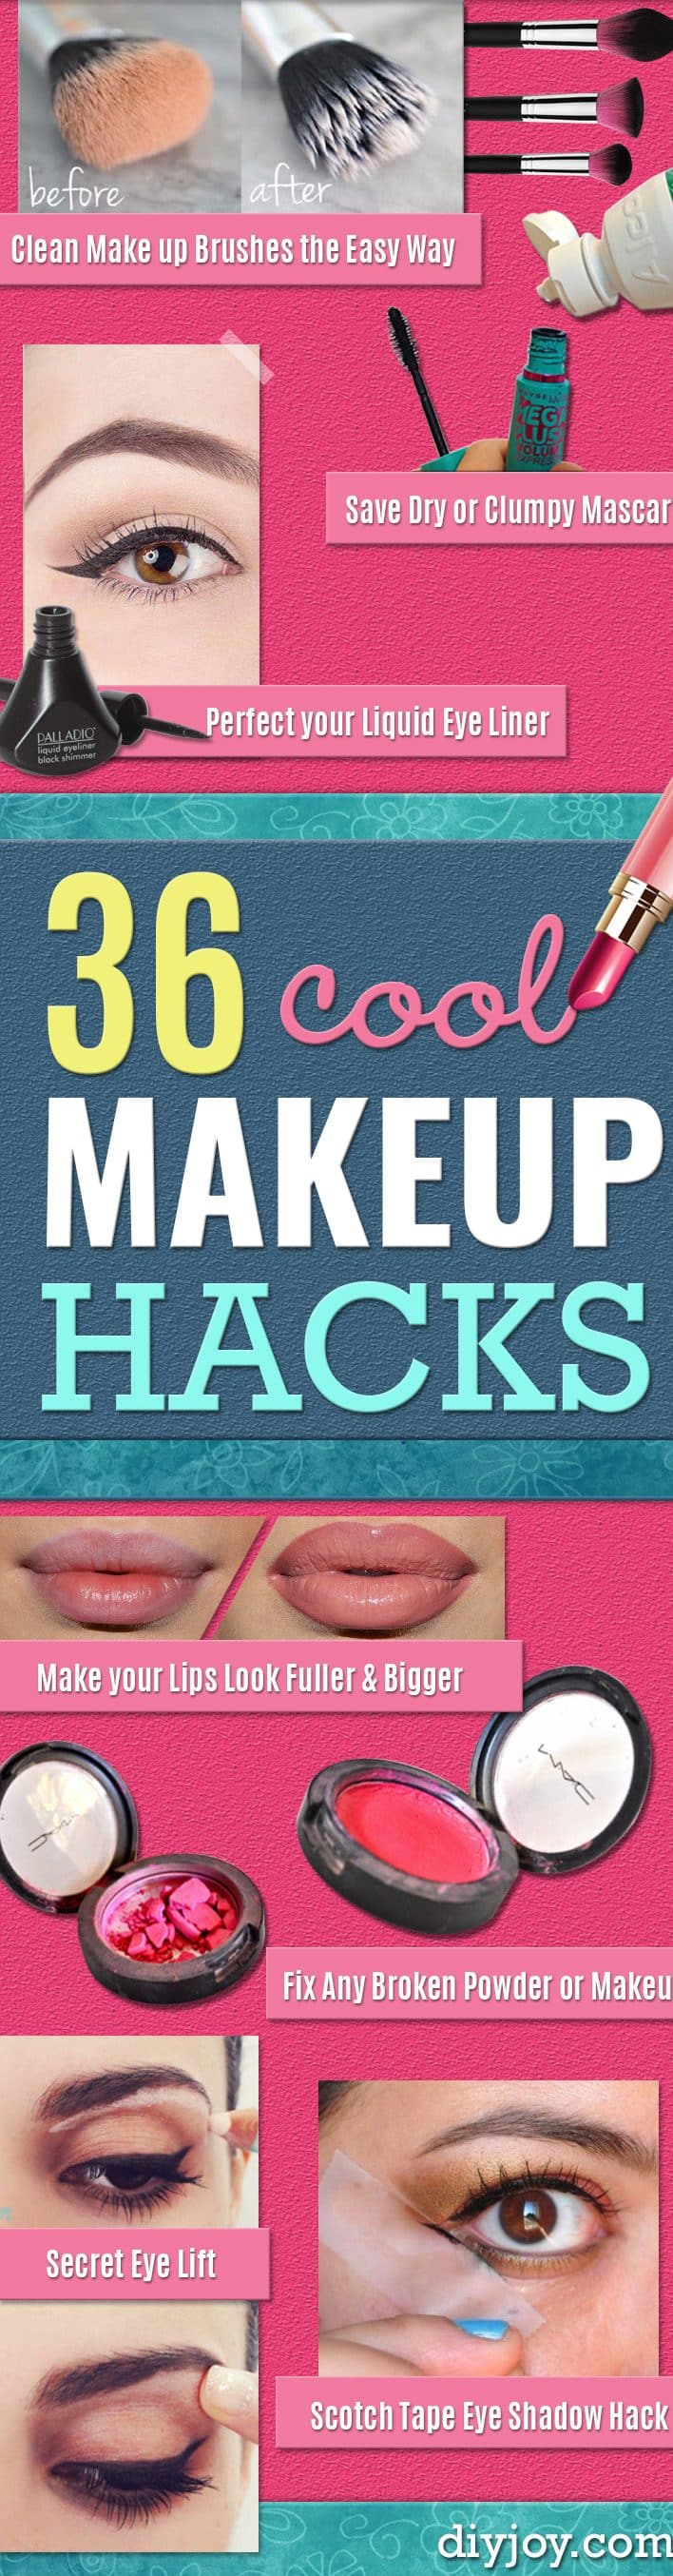 Cool DIY Makeup Hacks for Quick and Easy Beauty Ideas - projectnamehere - How To Fix Broken Makeup, Tips and Tricks for Mascara and Eye Liner, Lipstick and Foundation Tutorials - Fast Do It Yourself Beauty Projects for Women